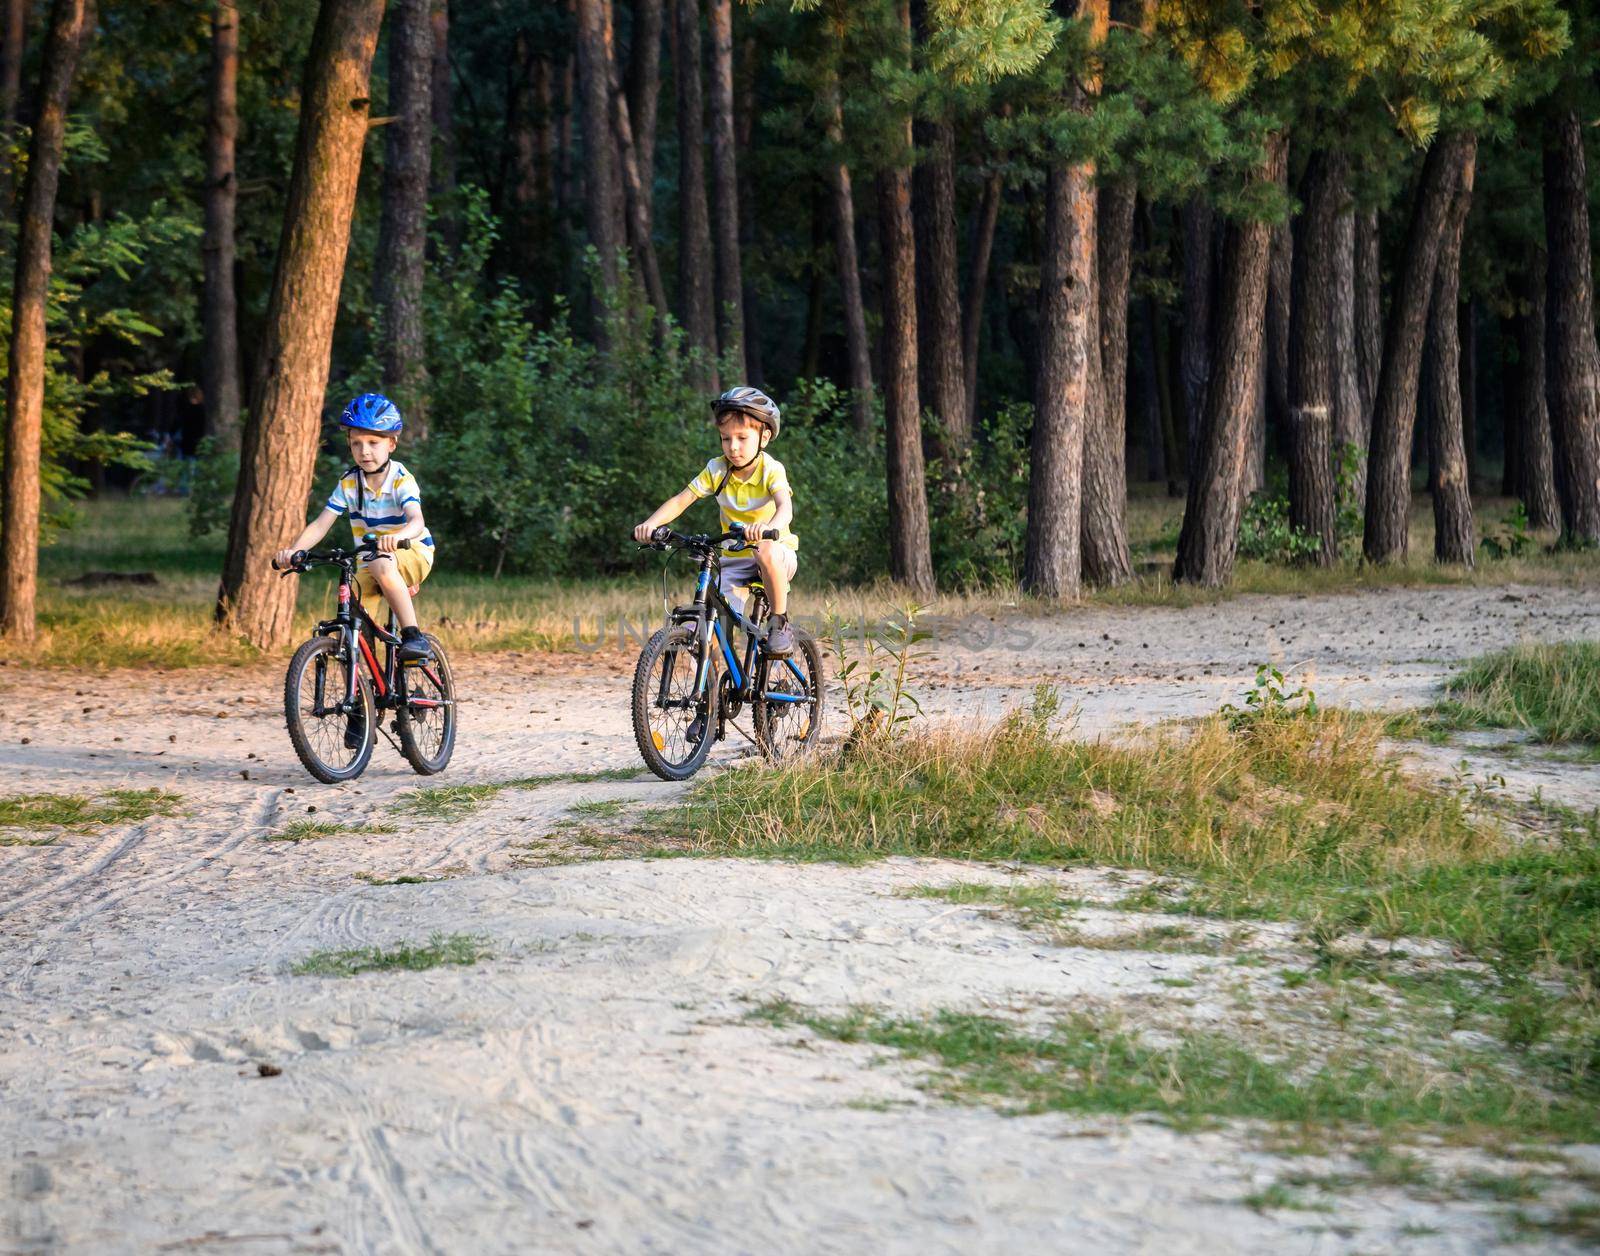 Two active little sibling boys having fun on bikes in forest on warm day. Healthy leisure with children concept.